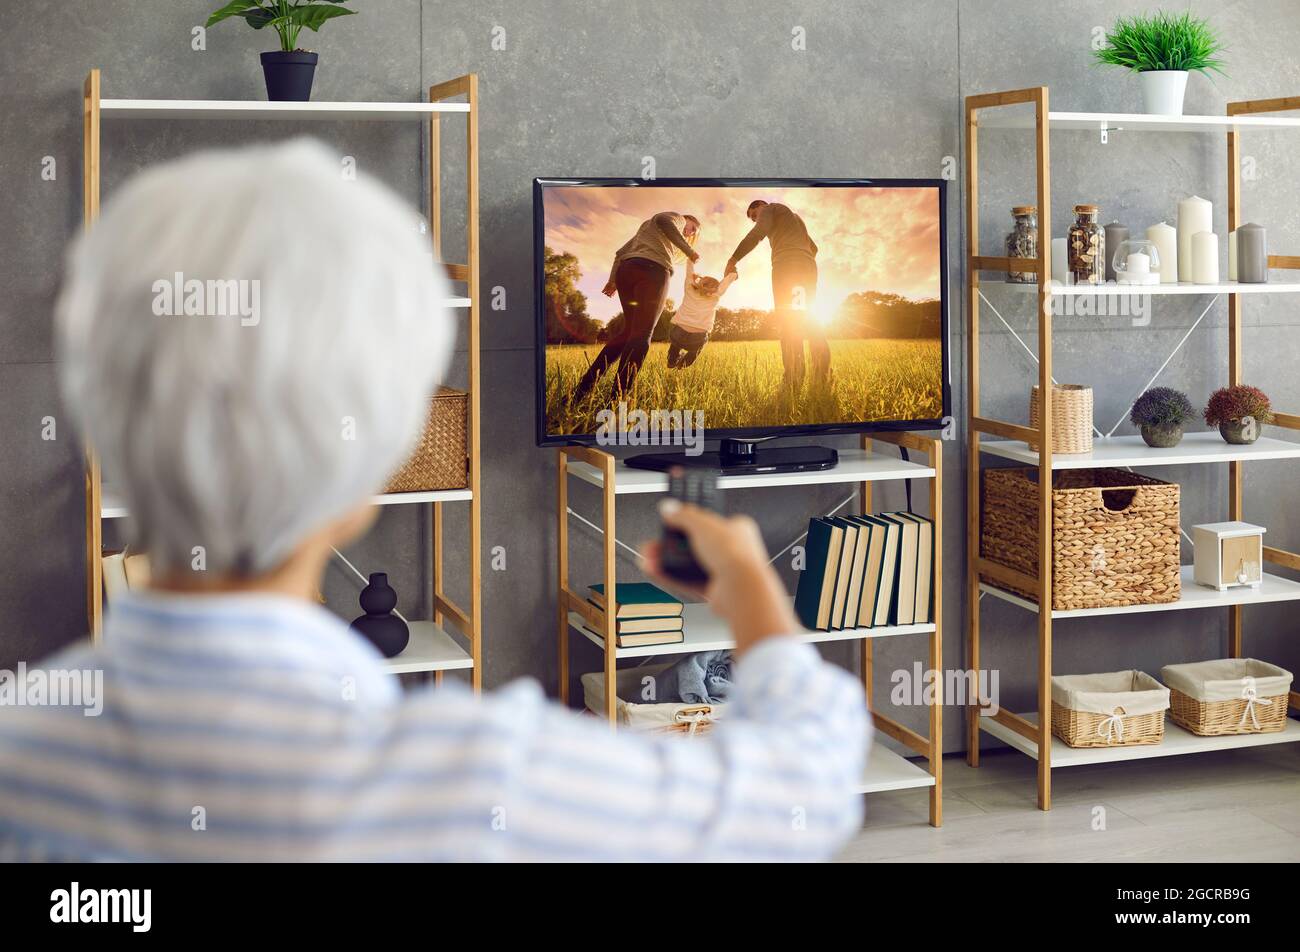 Senior woman watching a movie or a TV show on a large modern television set at home Stock Photo